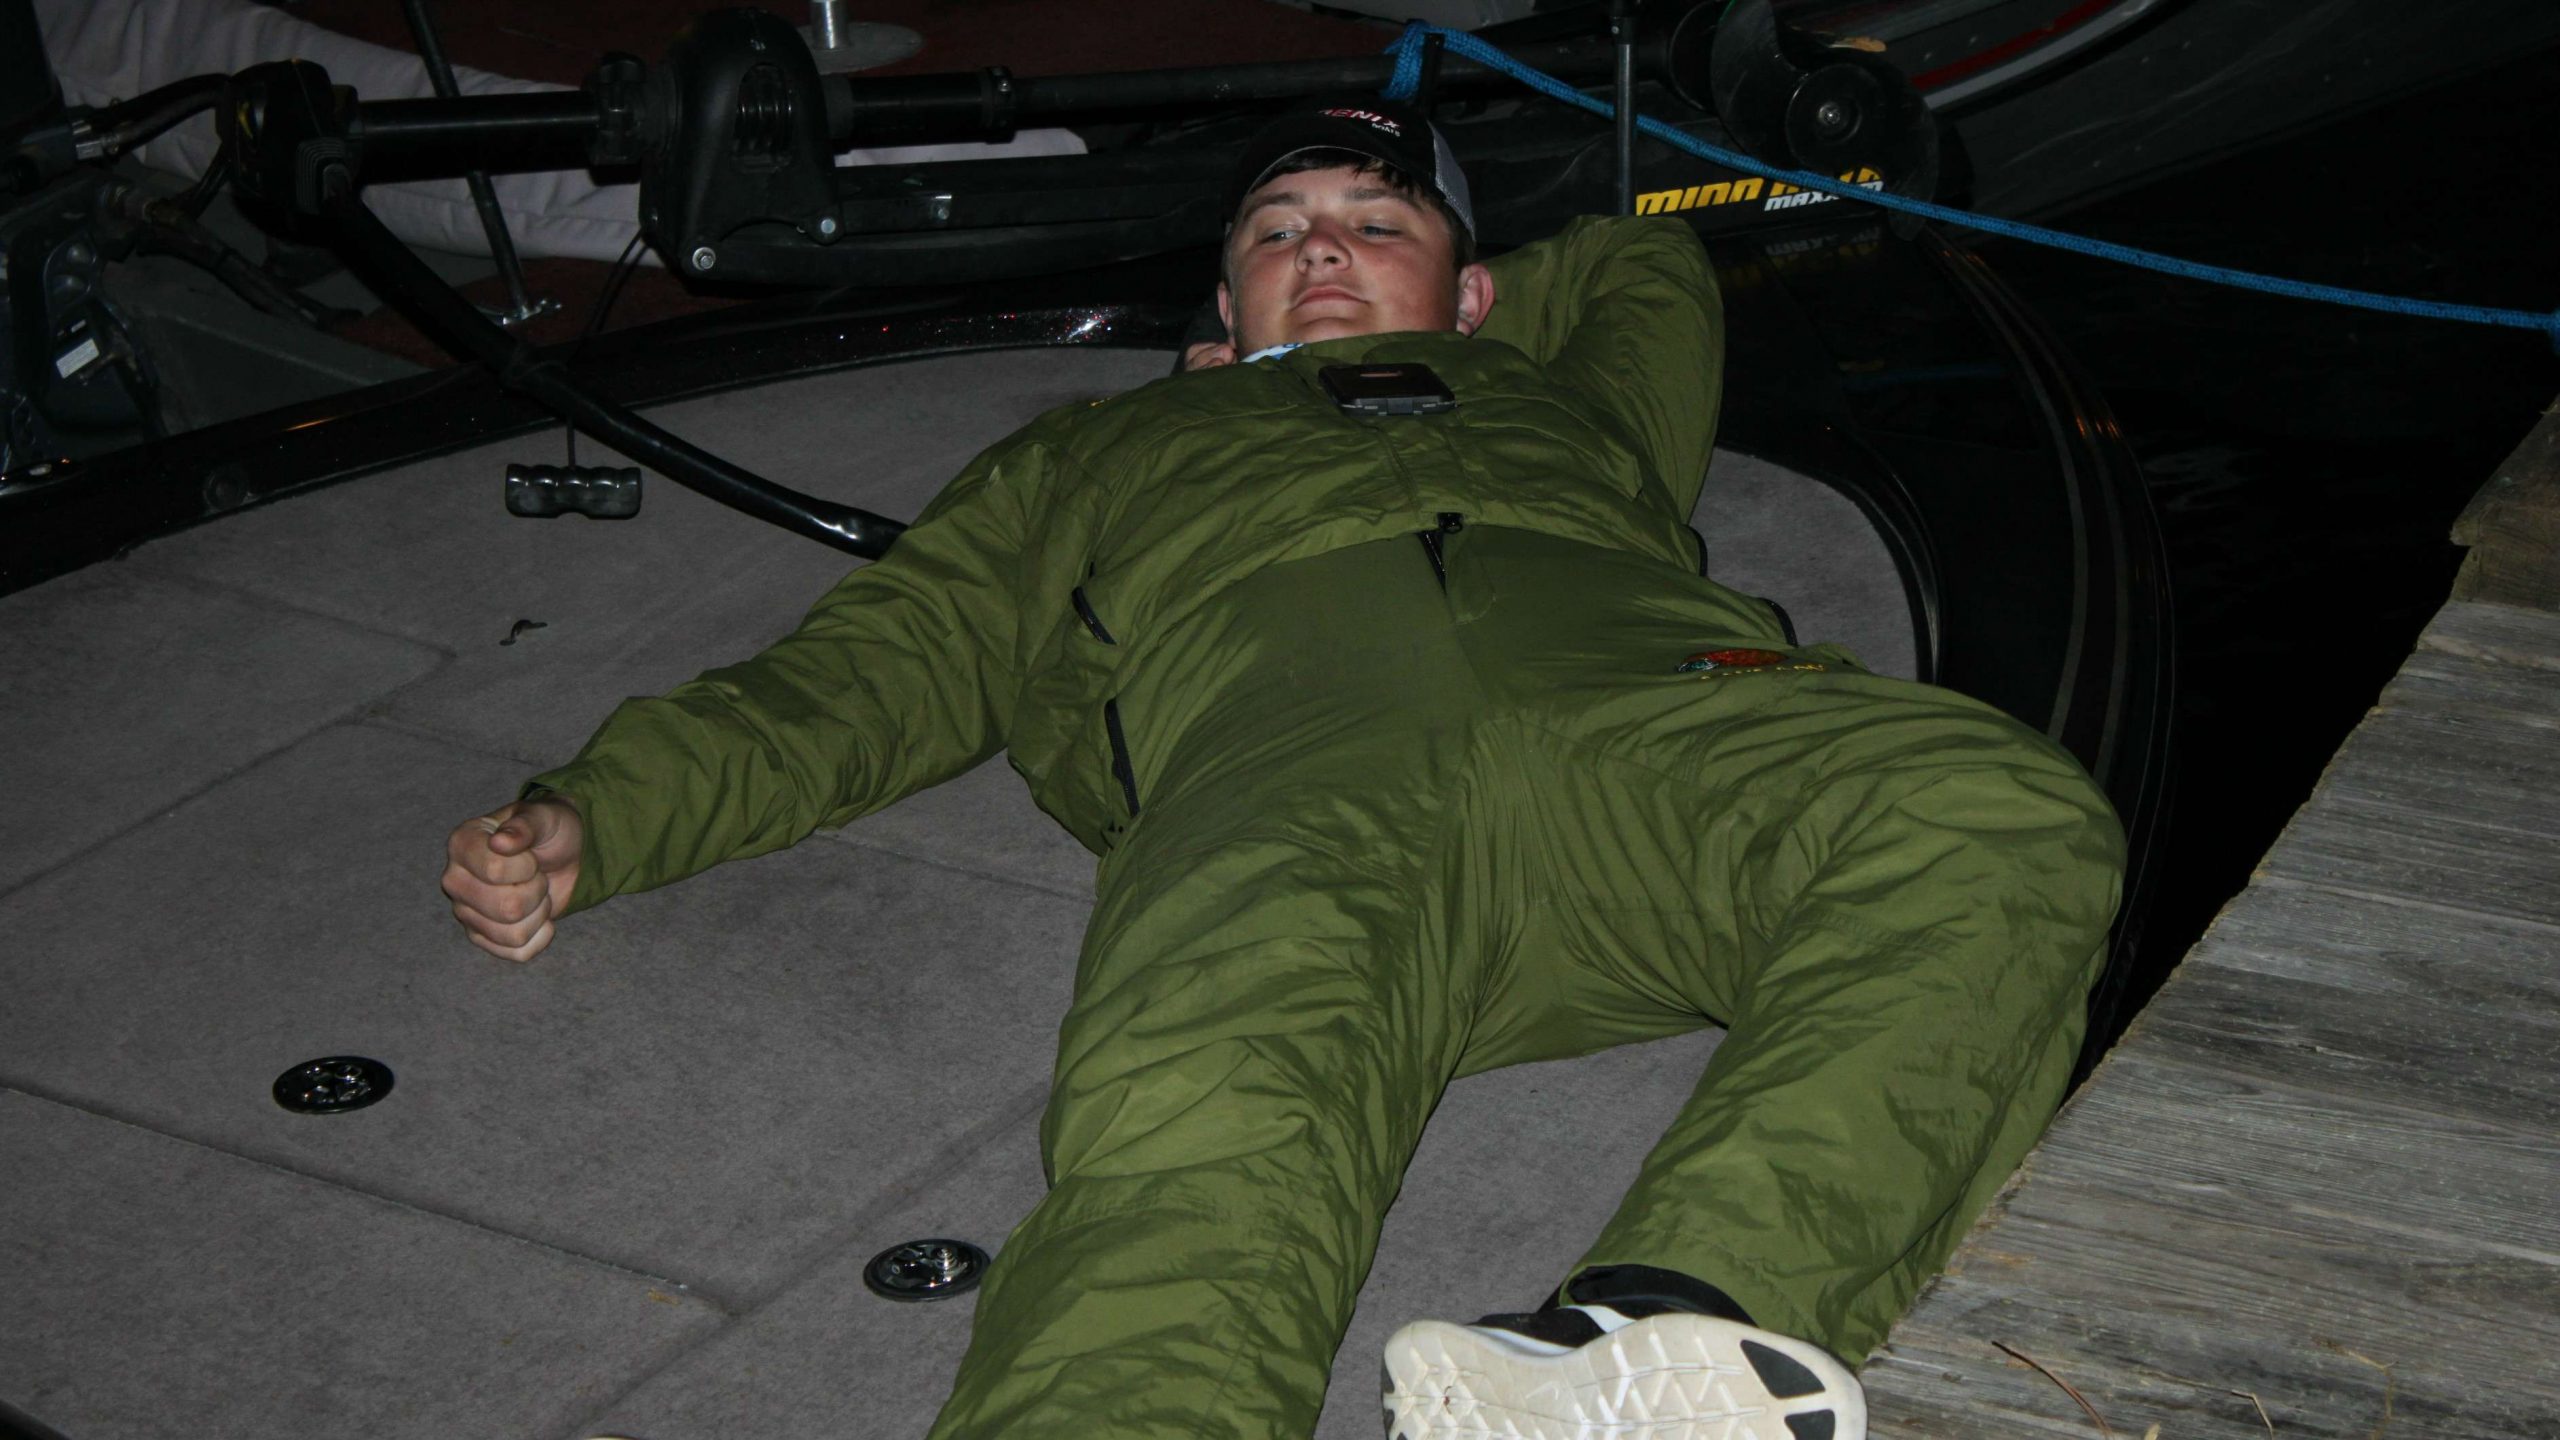 Colby Badeaux of Live Oak (La.) High reclines on the bow of
his day's ride. Many of the young anglers were up at 2 or 3 a.m. to
make their way to the launch for a 6:15 a.m. take-off.